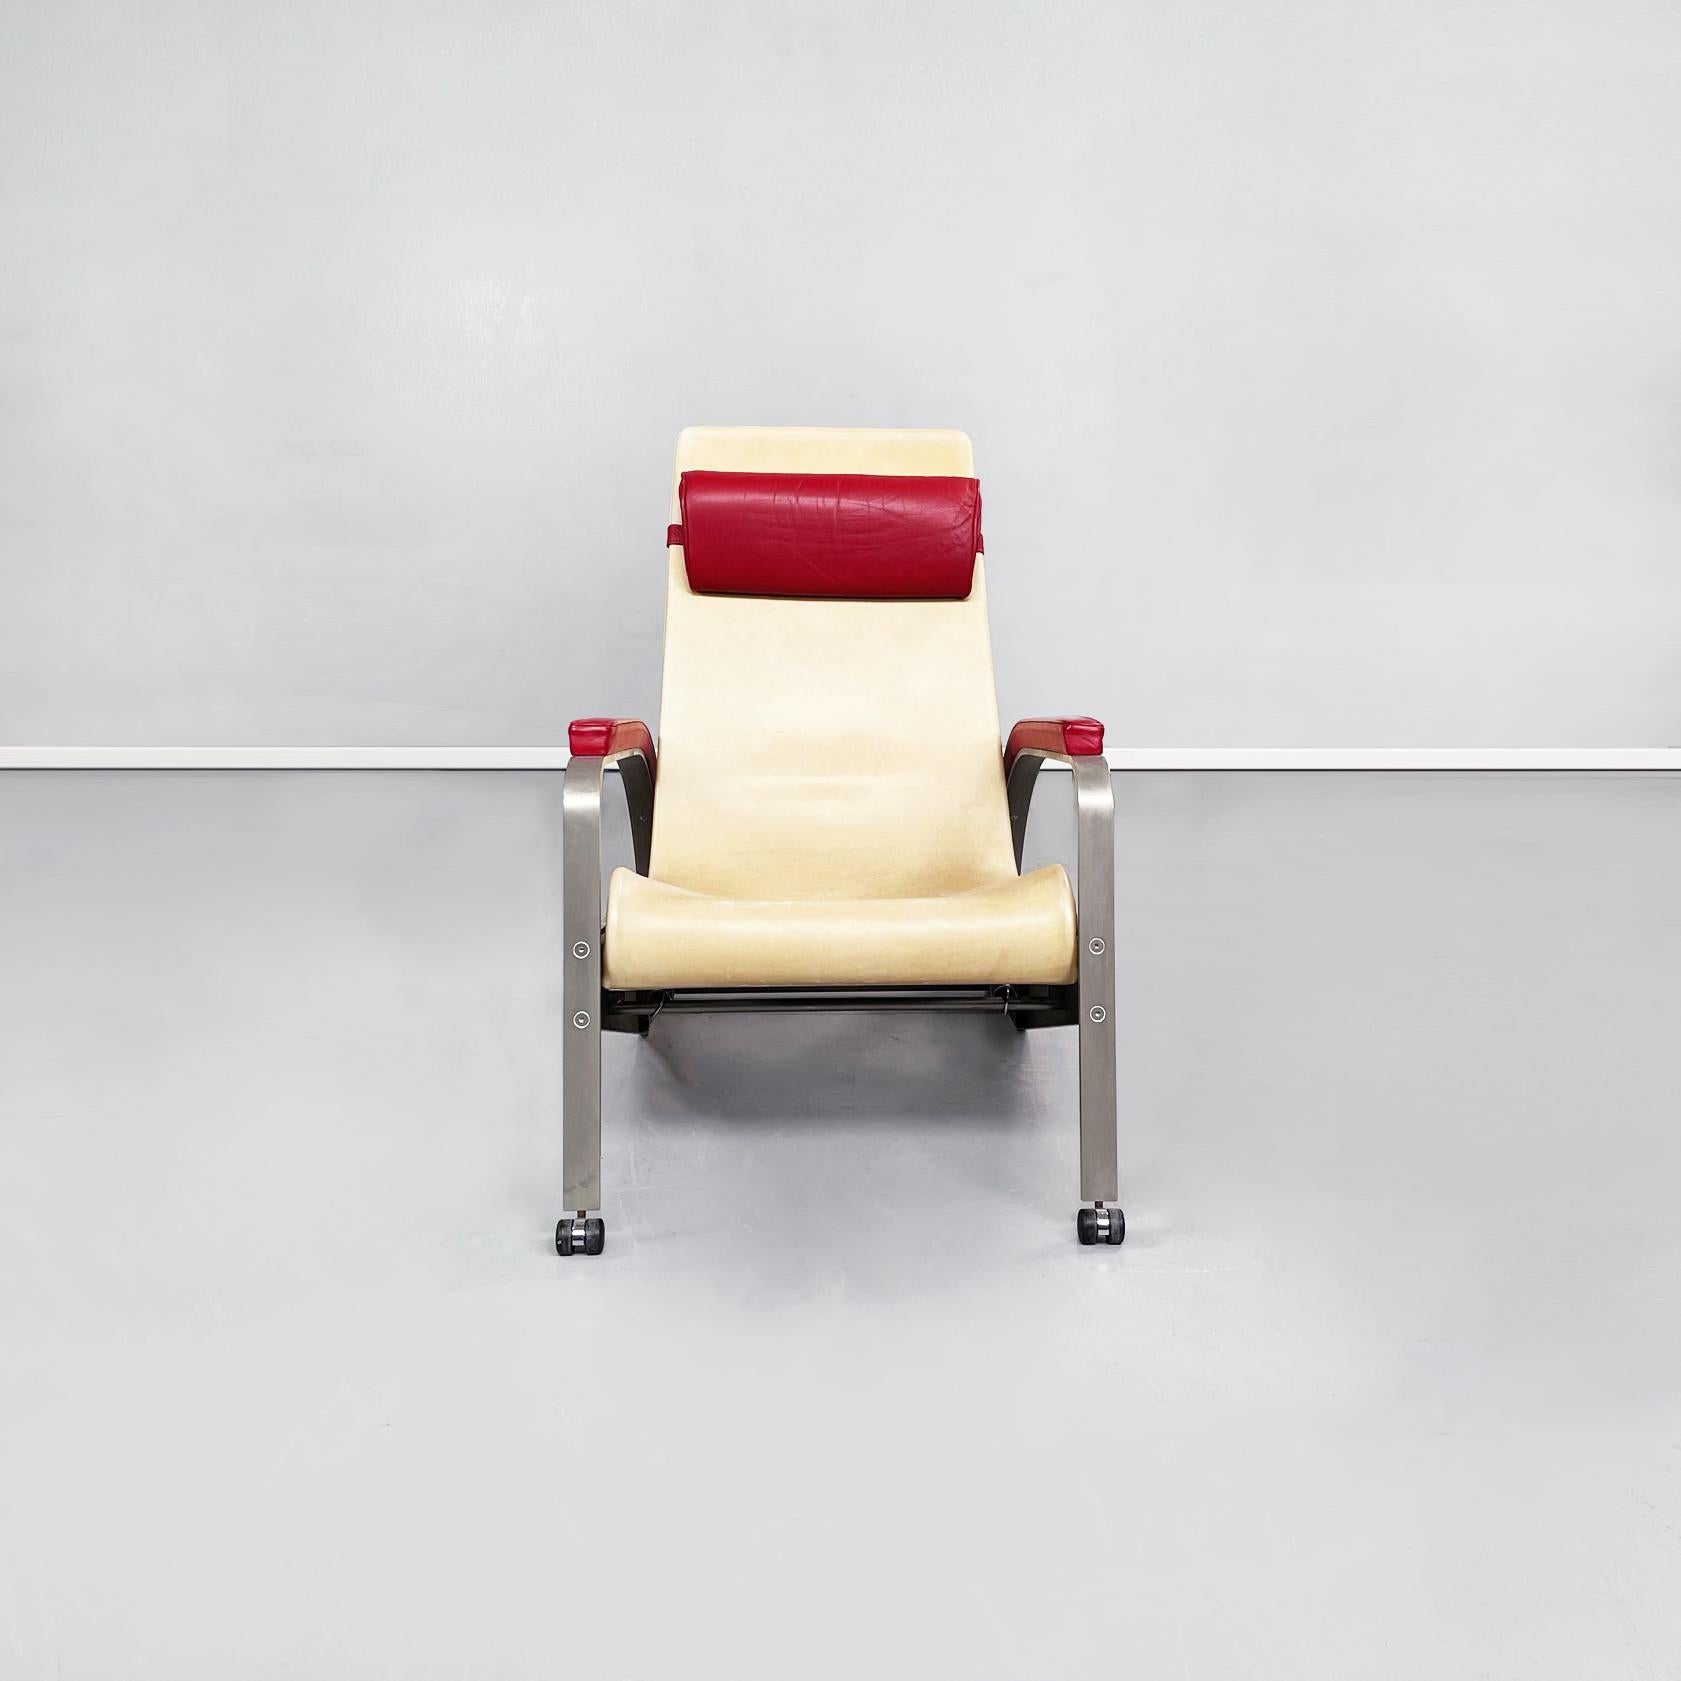 French modern reclining leather and steel armchairs by Jean Prouvé for Tecta, 1980s
Pair of reclining armchairs with seat and back upholstered in beige leather. There is a rectangular cushion padded and upholstered in red leather, tied to the